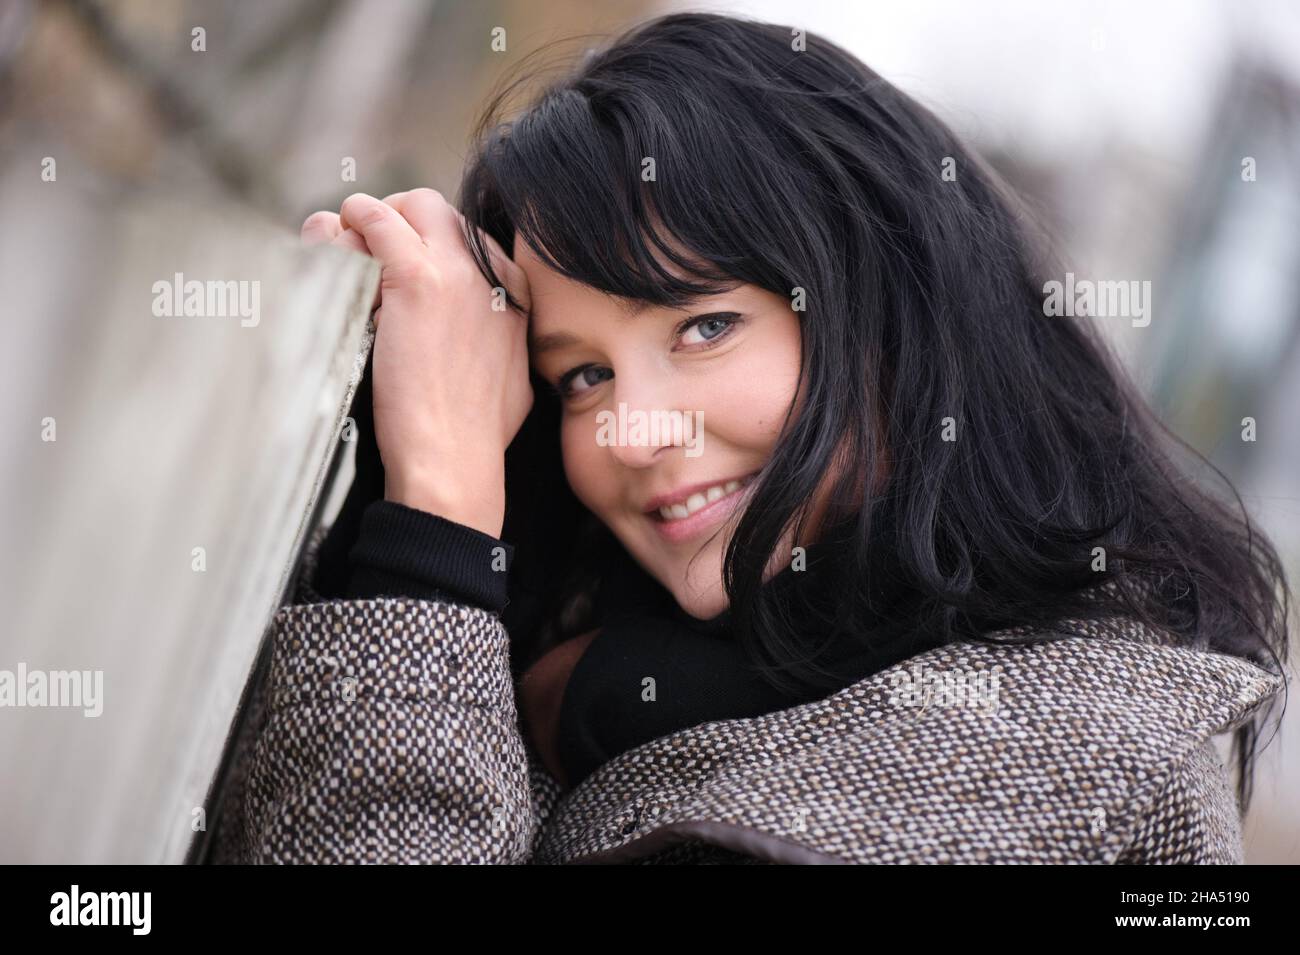 Smiling young woman in jacket standing beside old picket fence. Selective focus and shallow depth of field. Stock Photo